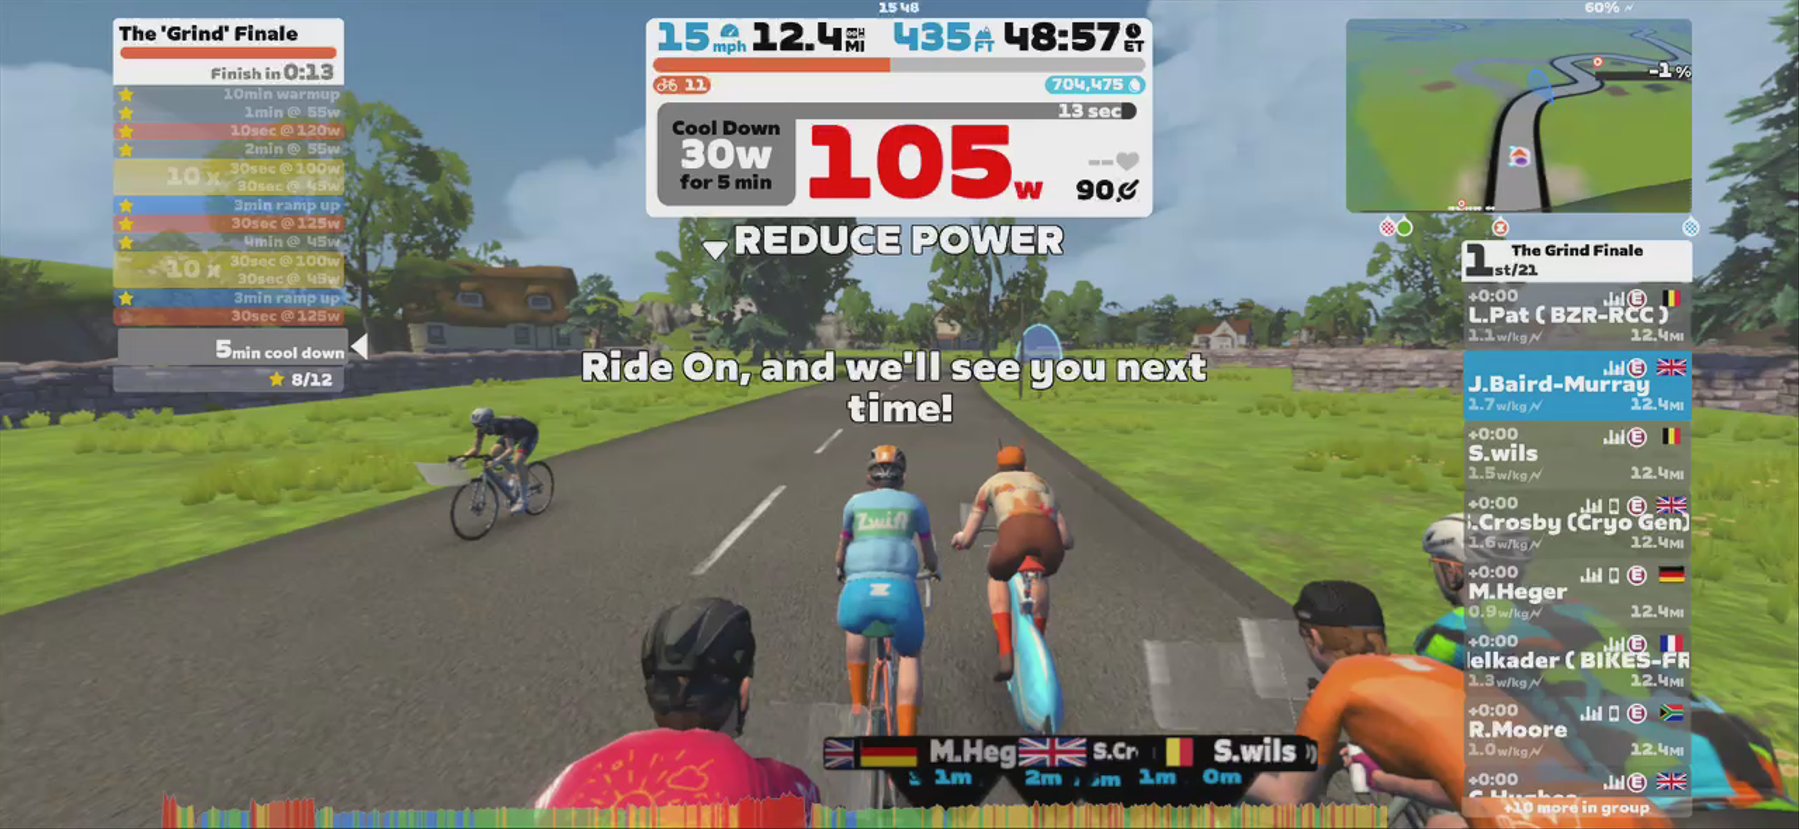 Zwift - Group Workout: The Grind Finale (E) on Douce France in France